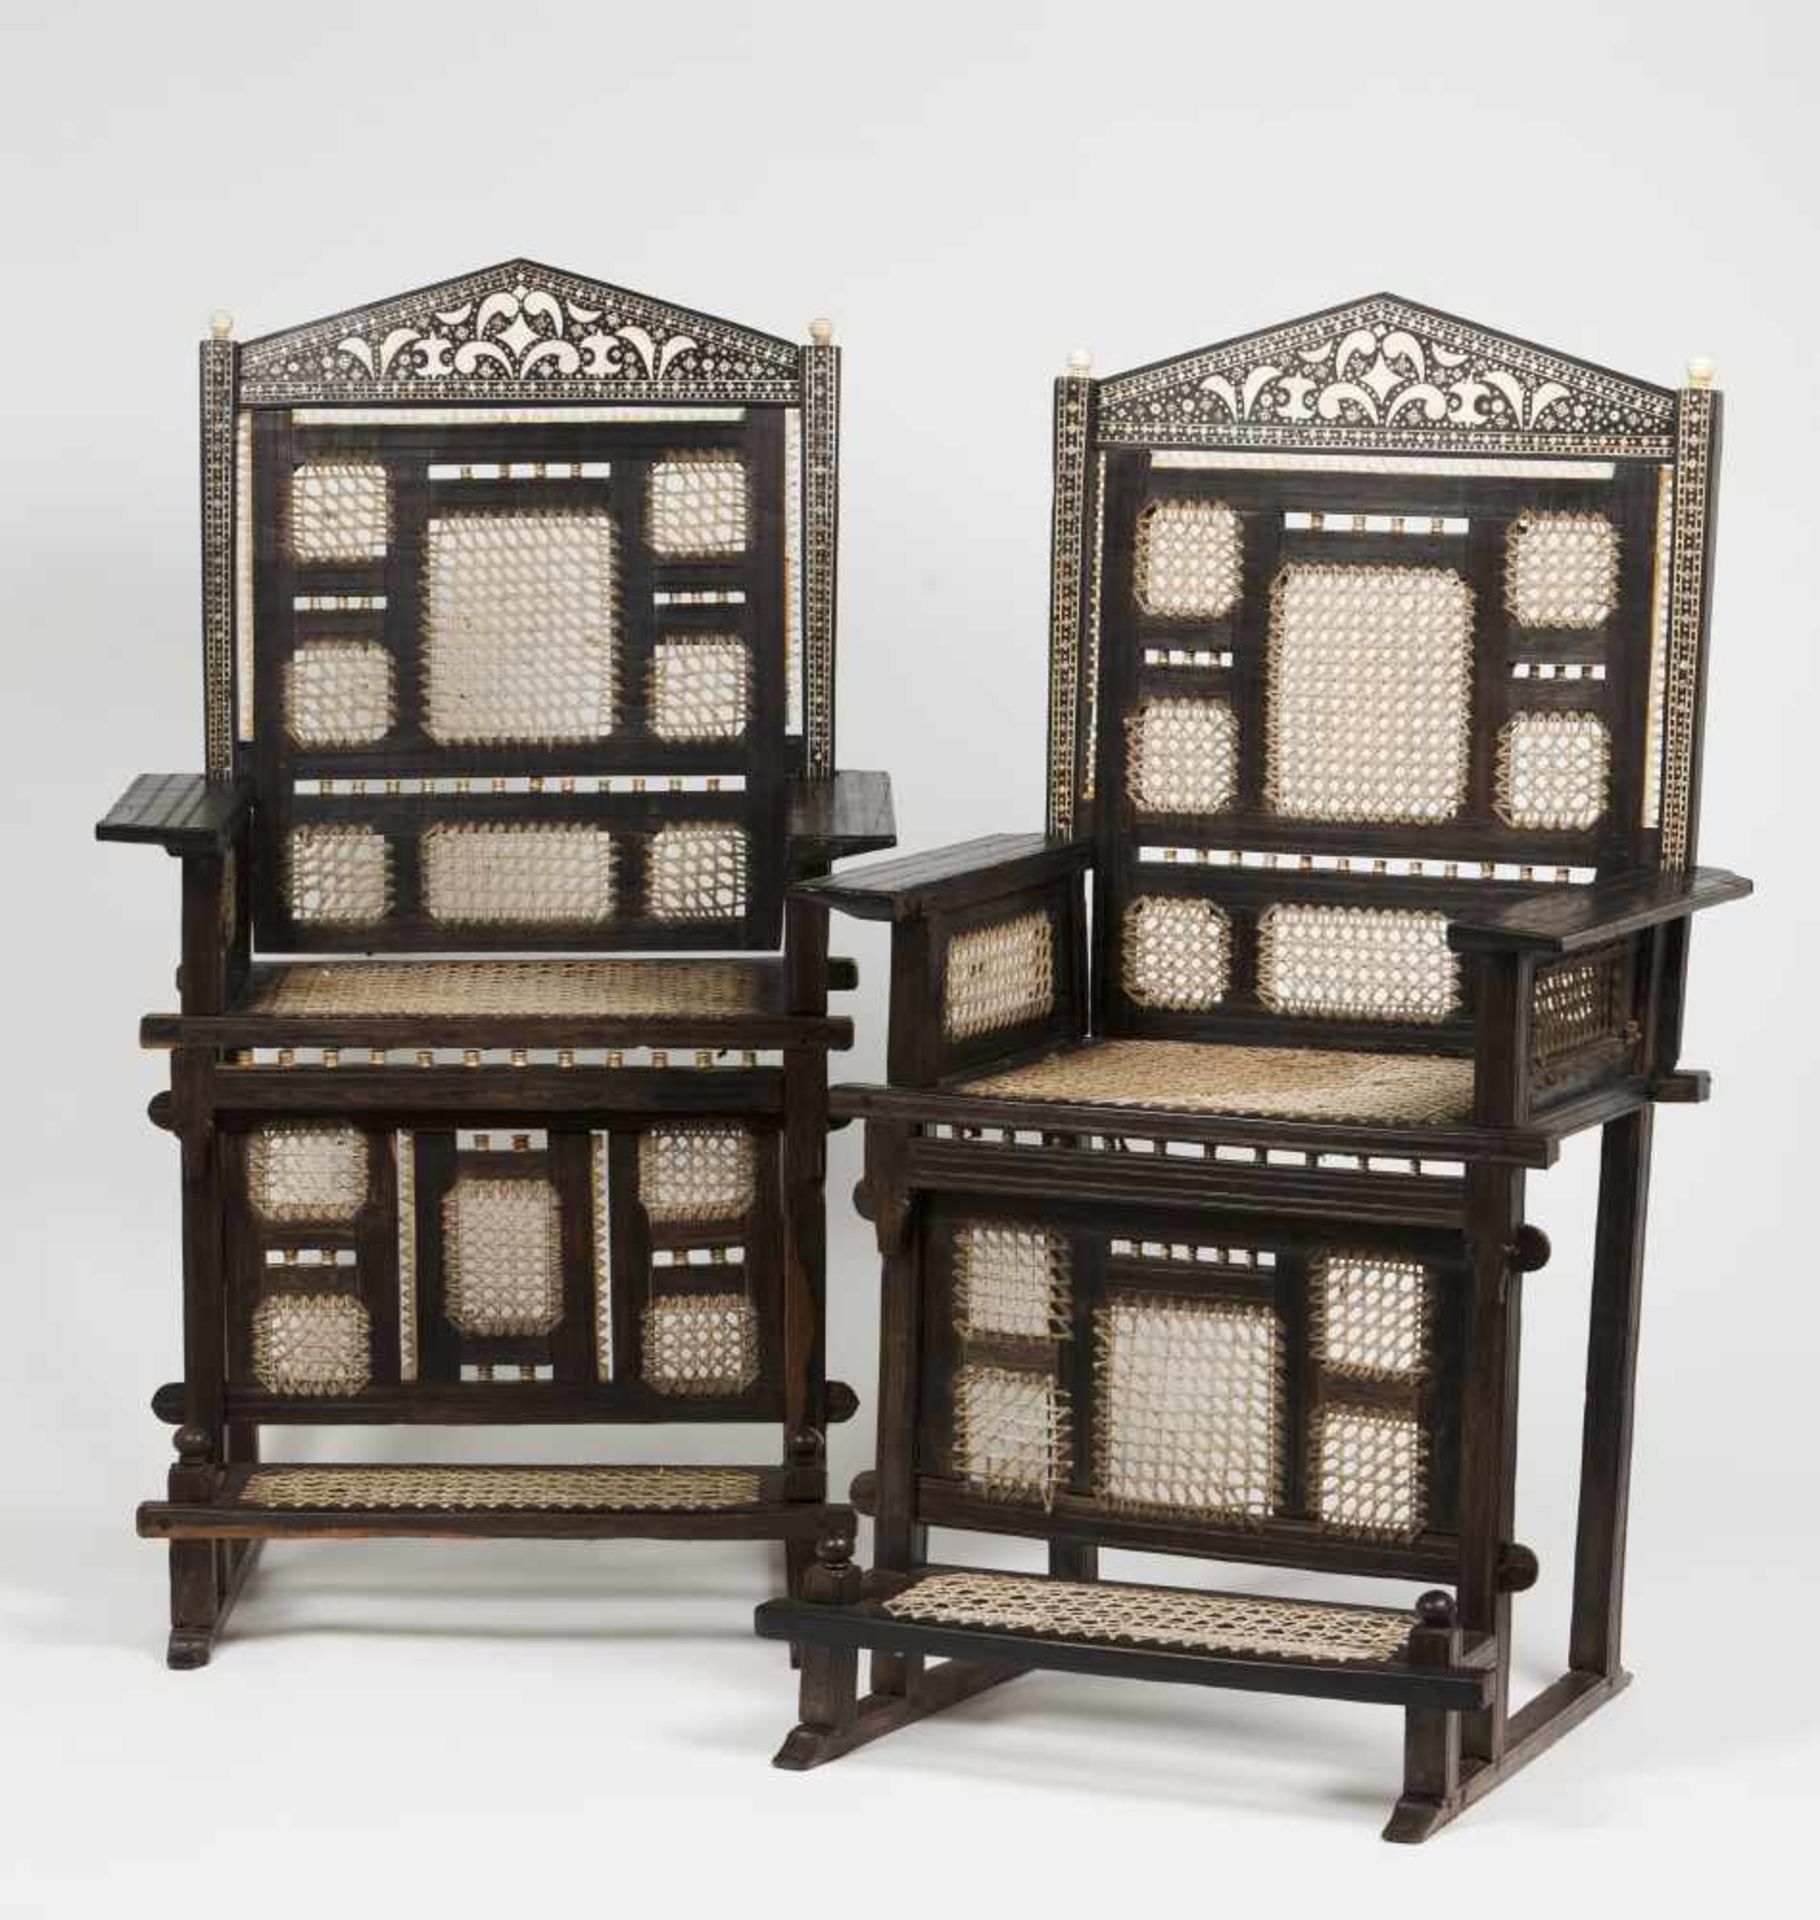 A pair of Indo-Afro-Portuguese chairs